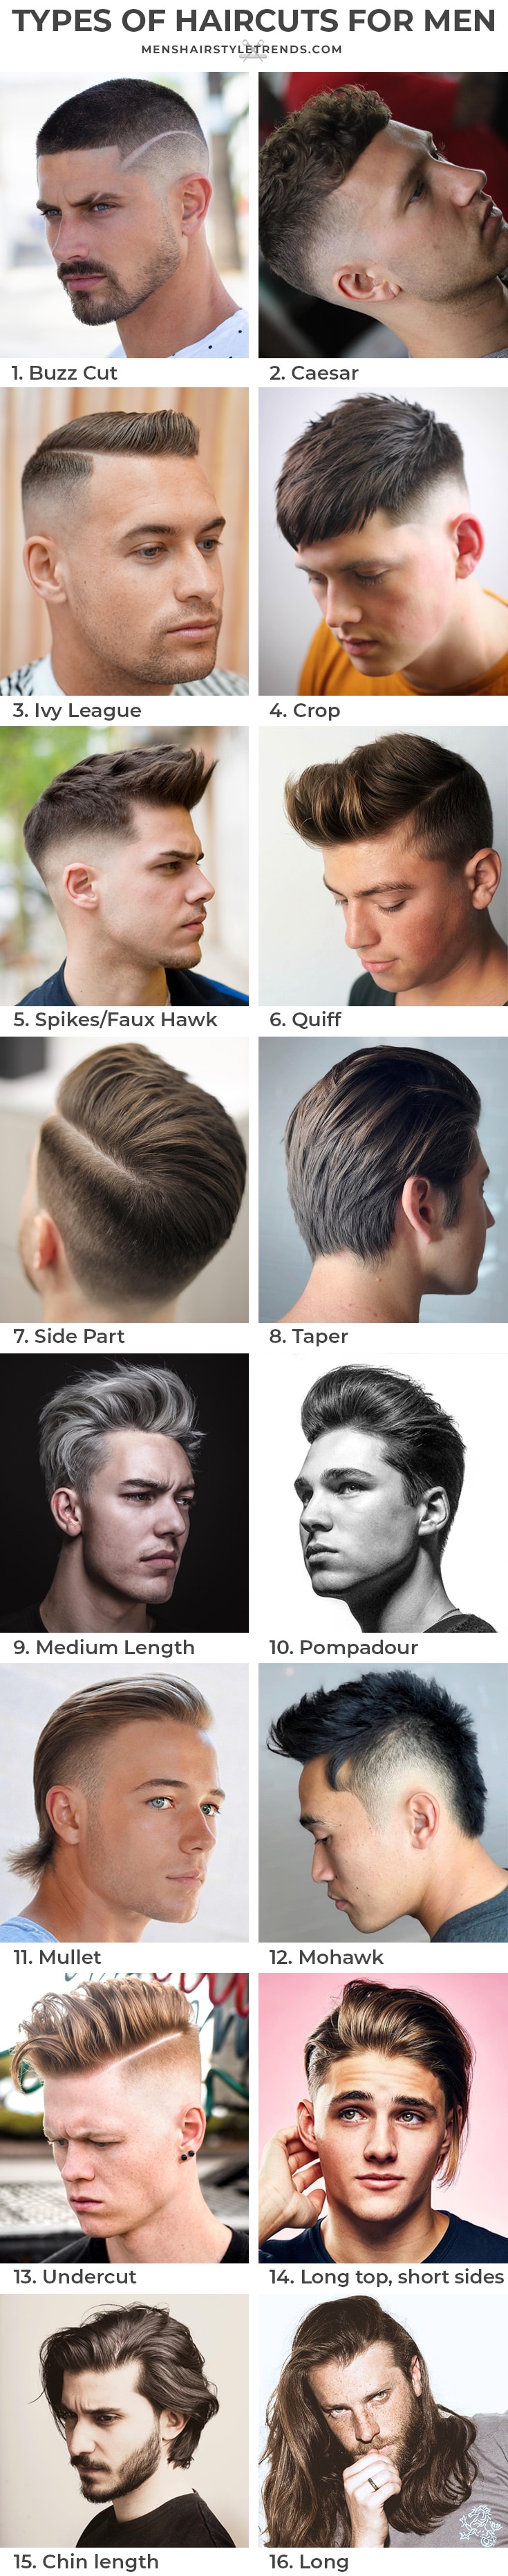 Types Of Haircuts For Men MensHairstylesTrends Com 